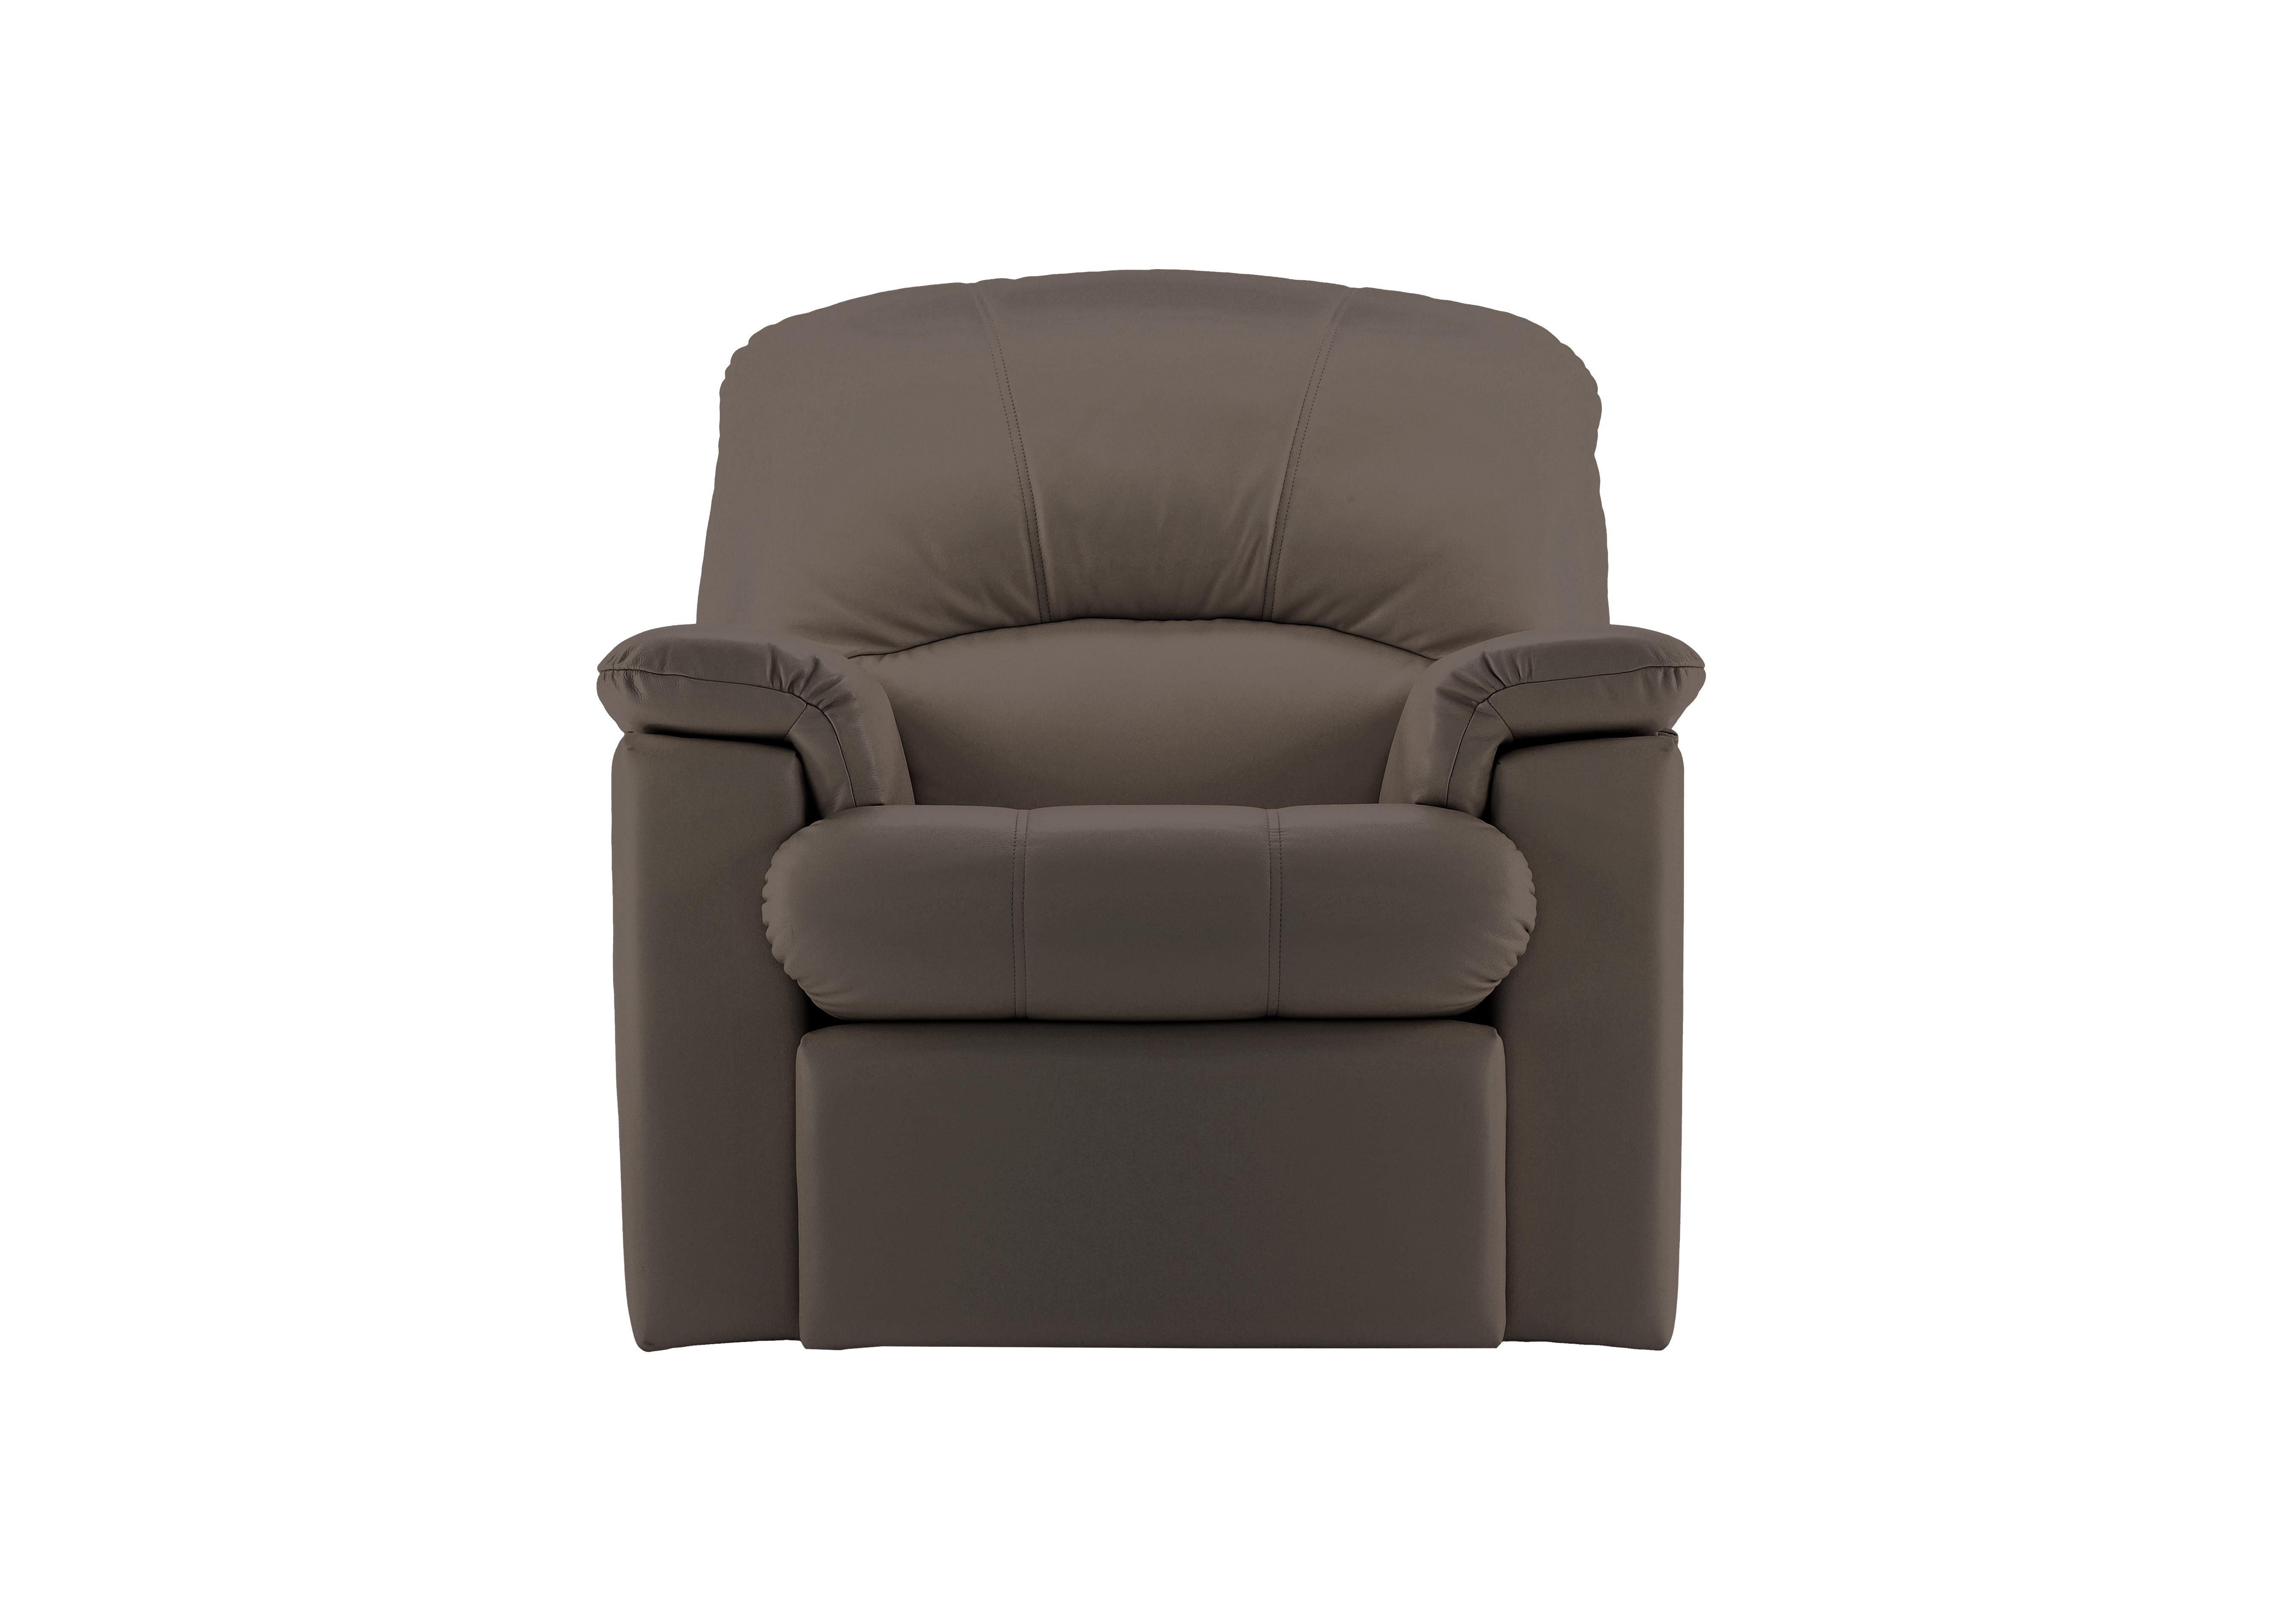 Chloe Leather Armchair in P232 Capri Taupe on Furniture Village